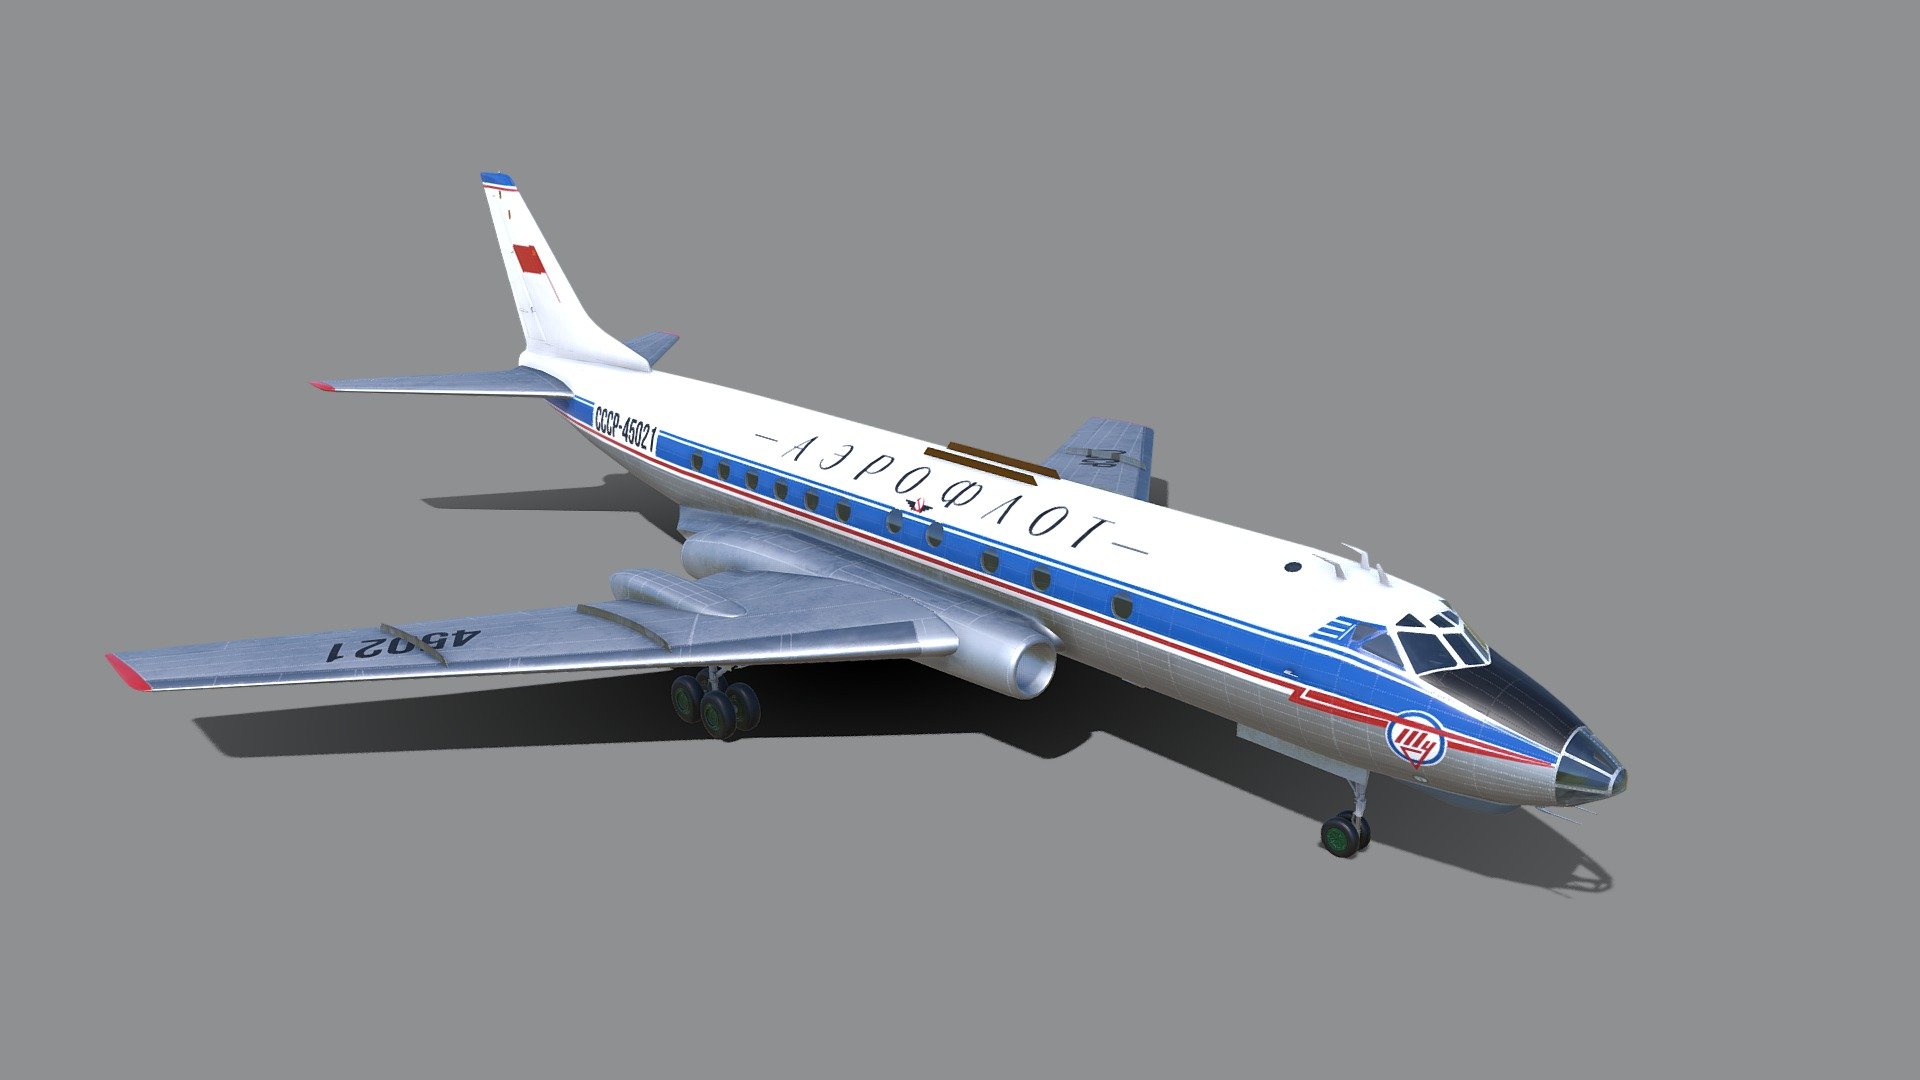 The Tupolev Tu-124 (NATO reporting name: Cookpot) was a 56-passenger short-range twinjet airliner built in the Soviet Union. It was the first Soviet airliner powered by turbofan engines. Developed from the medium-range Tupolev Tu-104, the Tu-124 was meant to meet Aeroflot's requirement for a regional airliner to replace the Ilyushin Il-14 on domestic routes. Resembling a 75% scaled-down Tu-104, the two were hard to tell apart at a distance but it was not a complete copy of the Tu-104. The Tu-124 had a number of refinements, including double-slotted flaps, a large centre-section airbrake and automatic spoilers. Unlike the Tu-104, the wing trailing edge inboard of the undercarriage was unswept - Tupolev Tu-124 - Buy Royalty Free 3D model by Tim Samedov (@citizensnip) 3d model